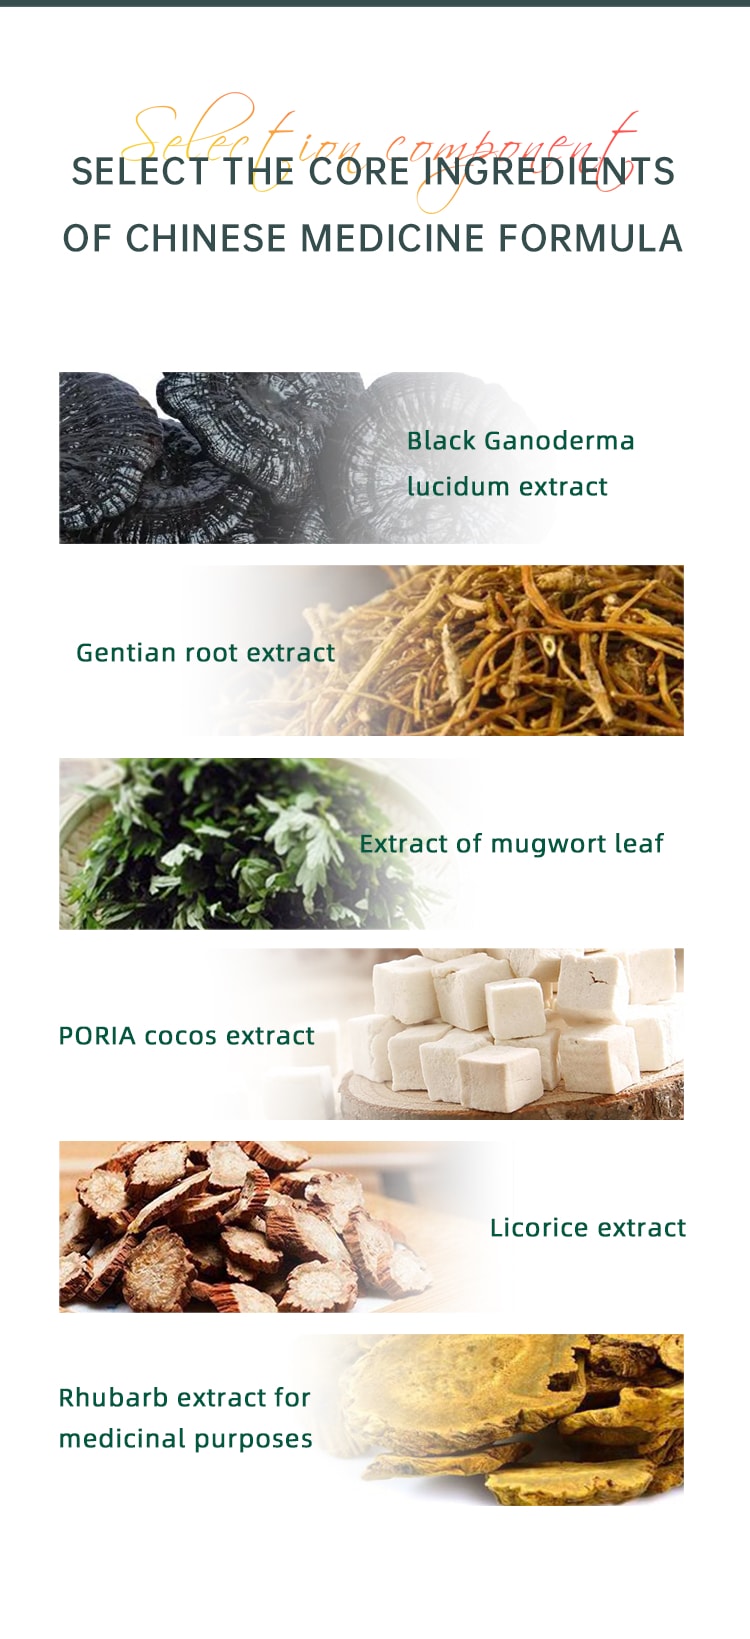 Selection of core ingredients Chinese medicine formula: black ganoderma extract, gentian root extract, mugwort leaf extract, poria cocos extract, licorice extract, medicinal rhubarb extract,special stickers for weight lossing, restoring your charming curves, losing weight easily, and looking exquisite.